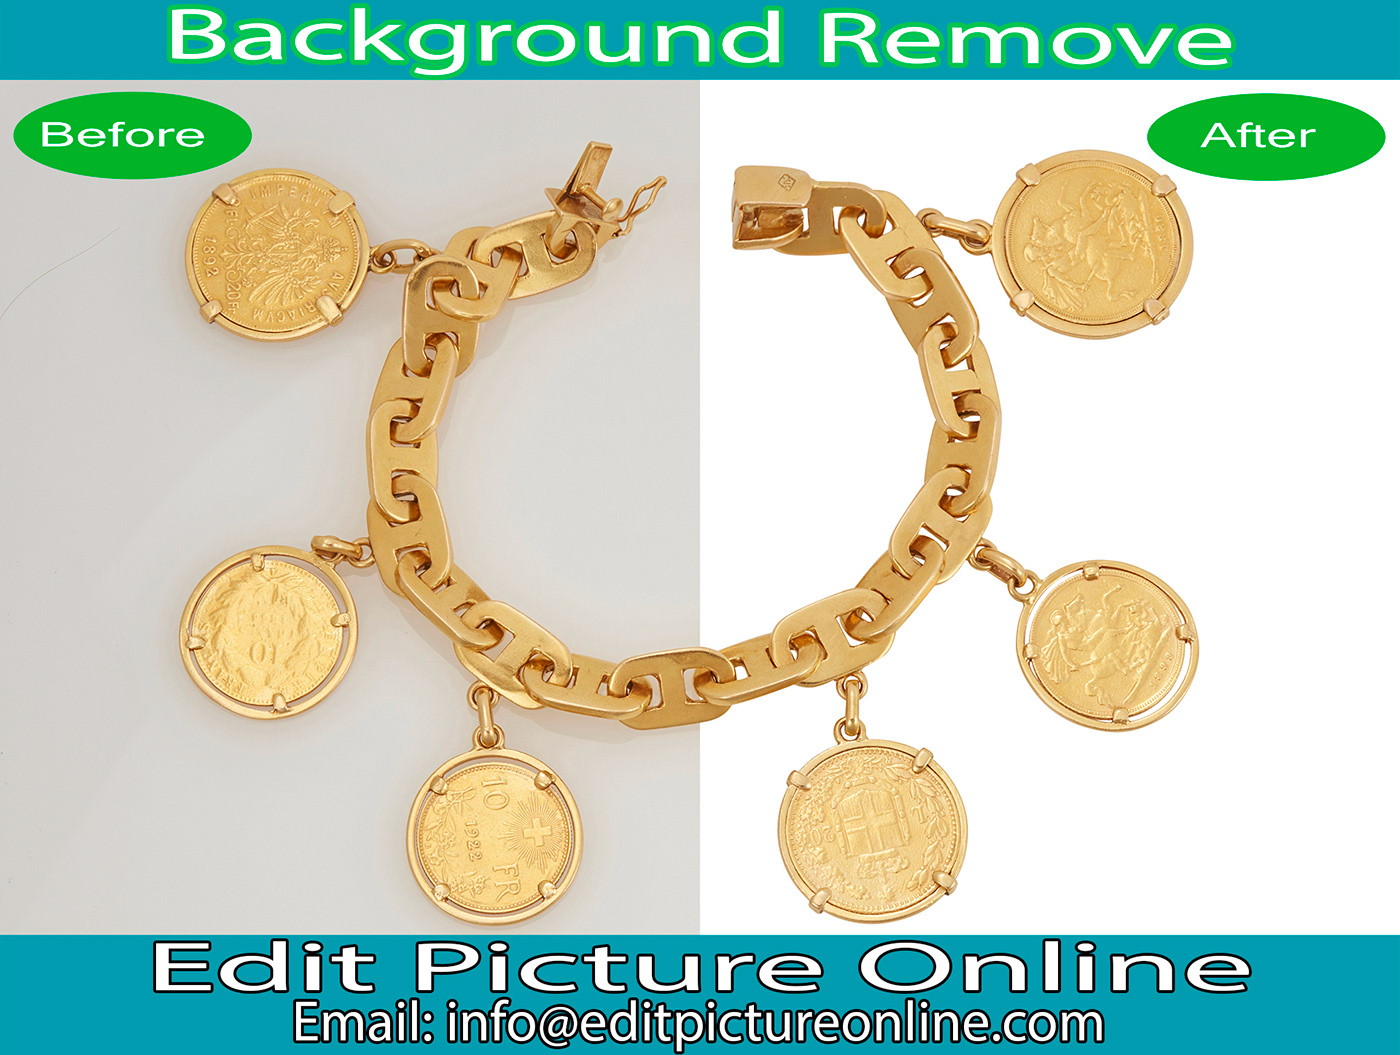 Clipping path and Background Remove Service